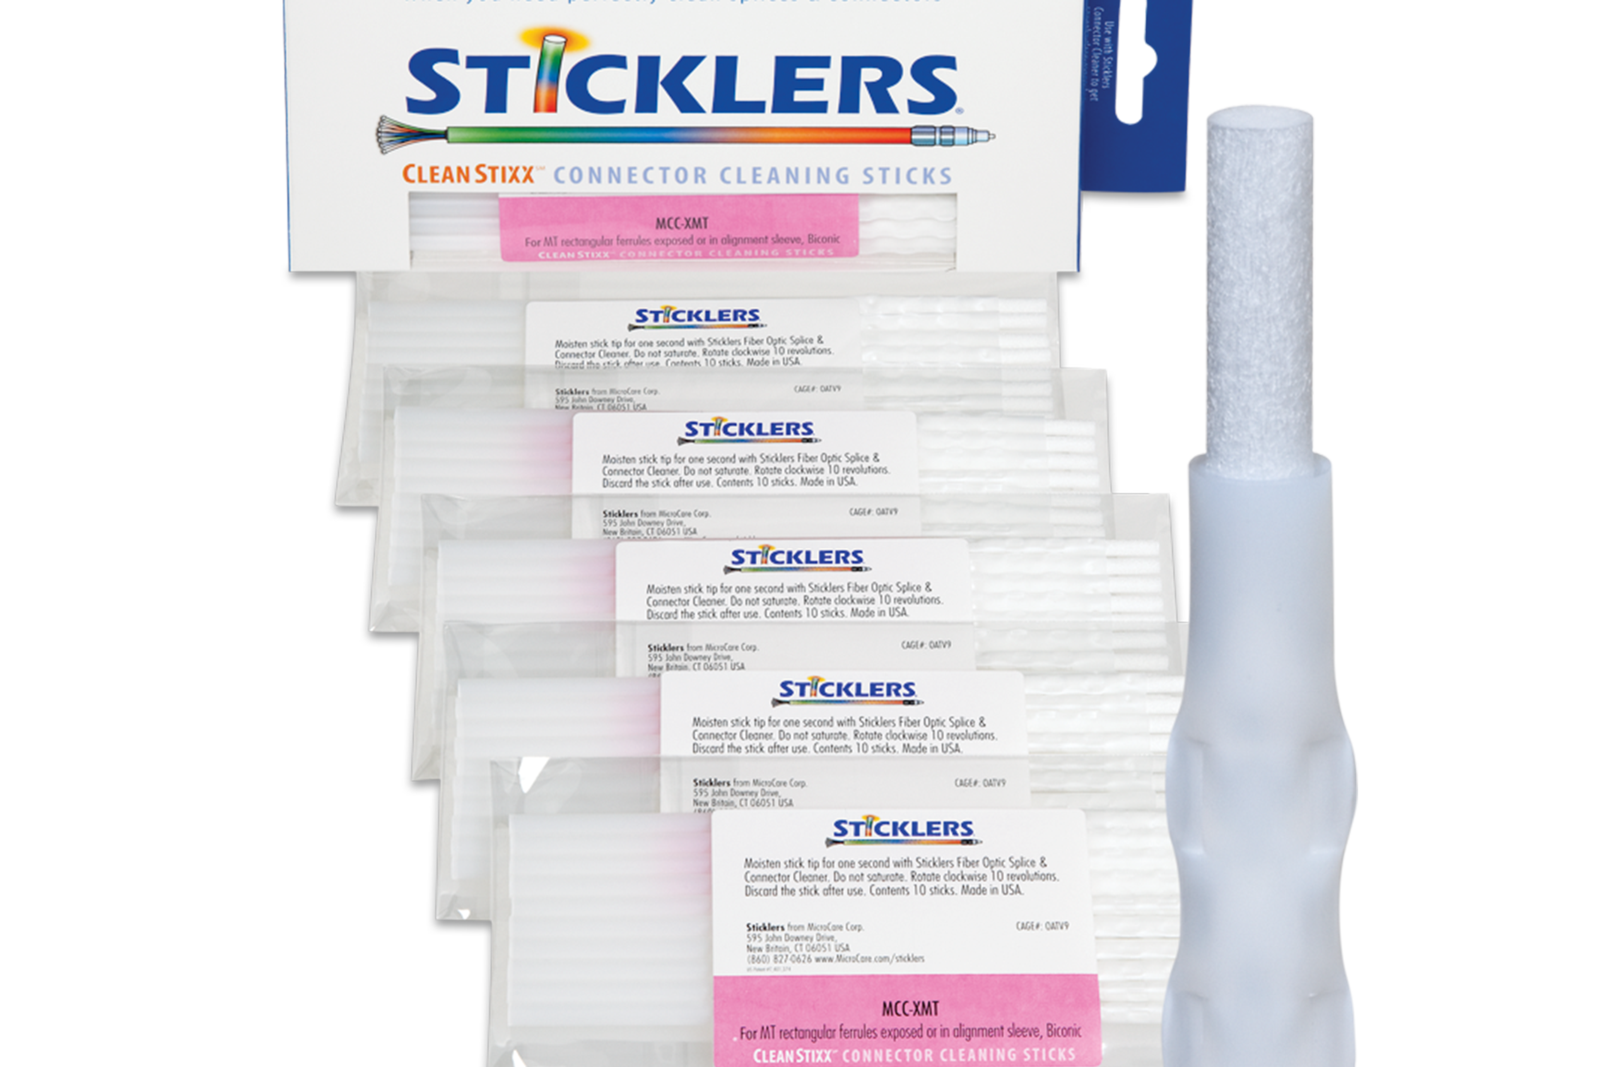 sticklers xmt clean stixx swabs for mpo fiber cleaners pink white mcc xmt